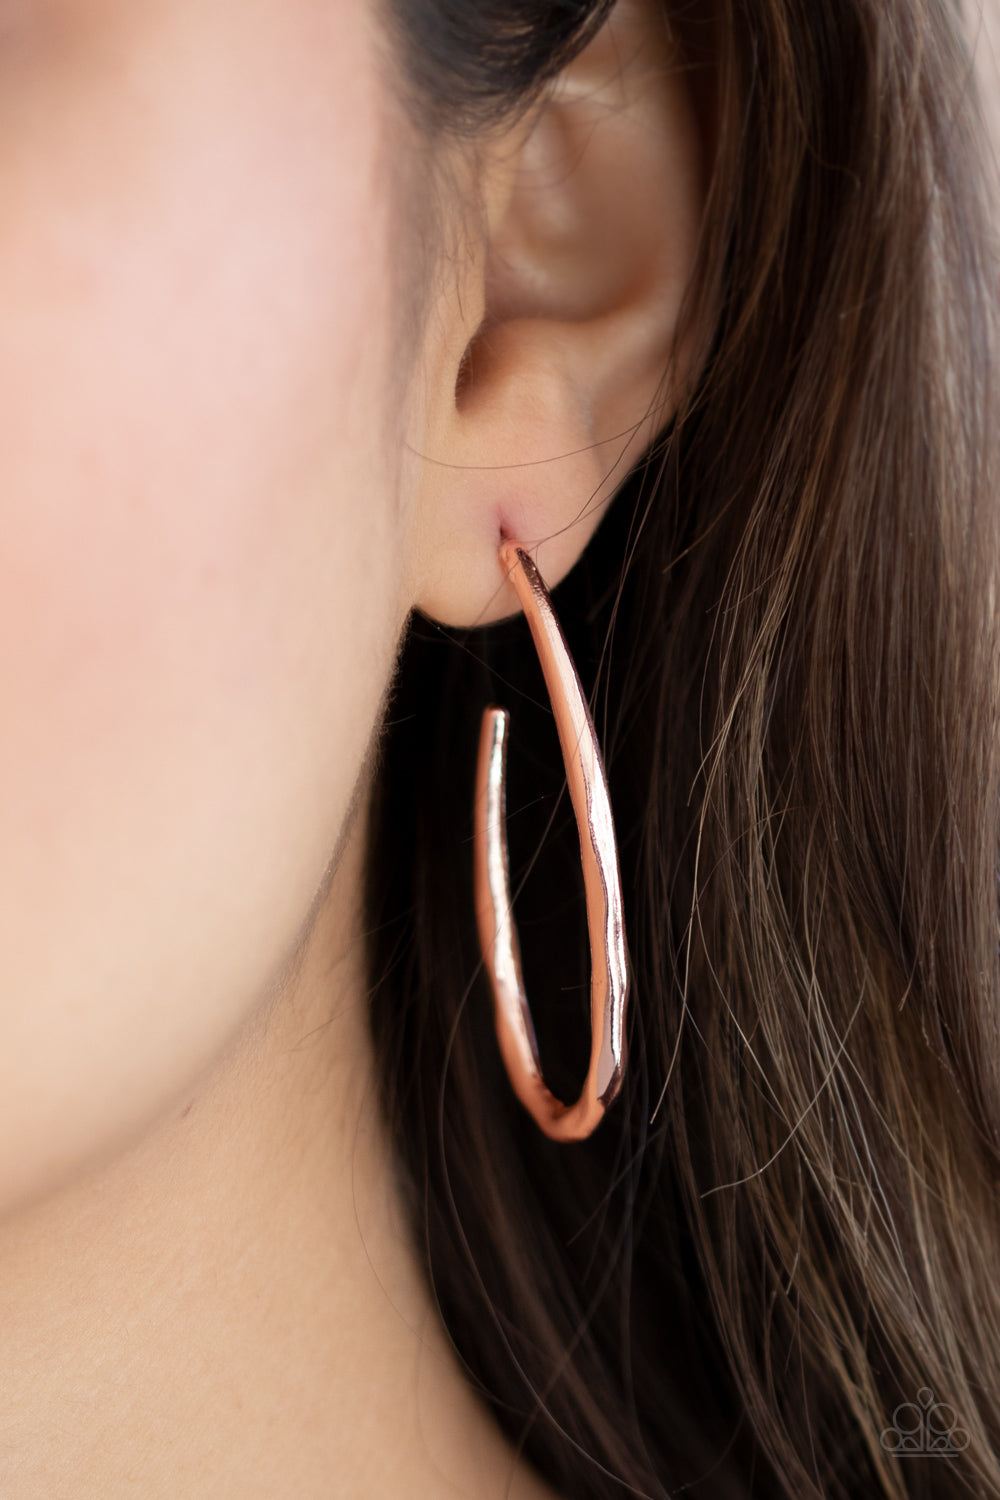 Oval Vintage Hoops from Glazd Jewels Gold